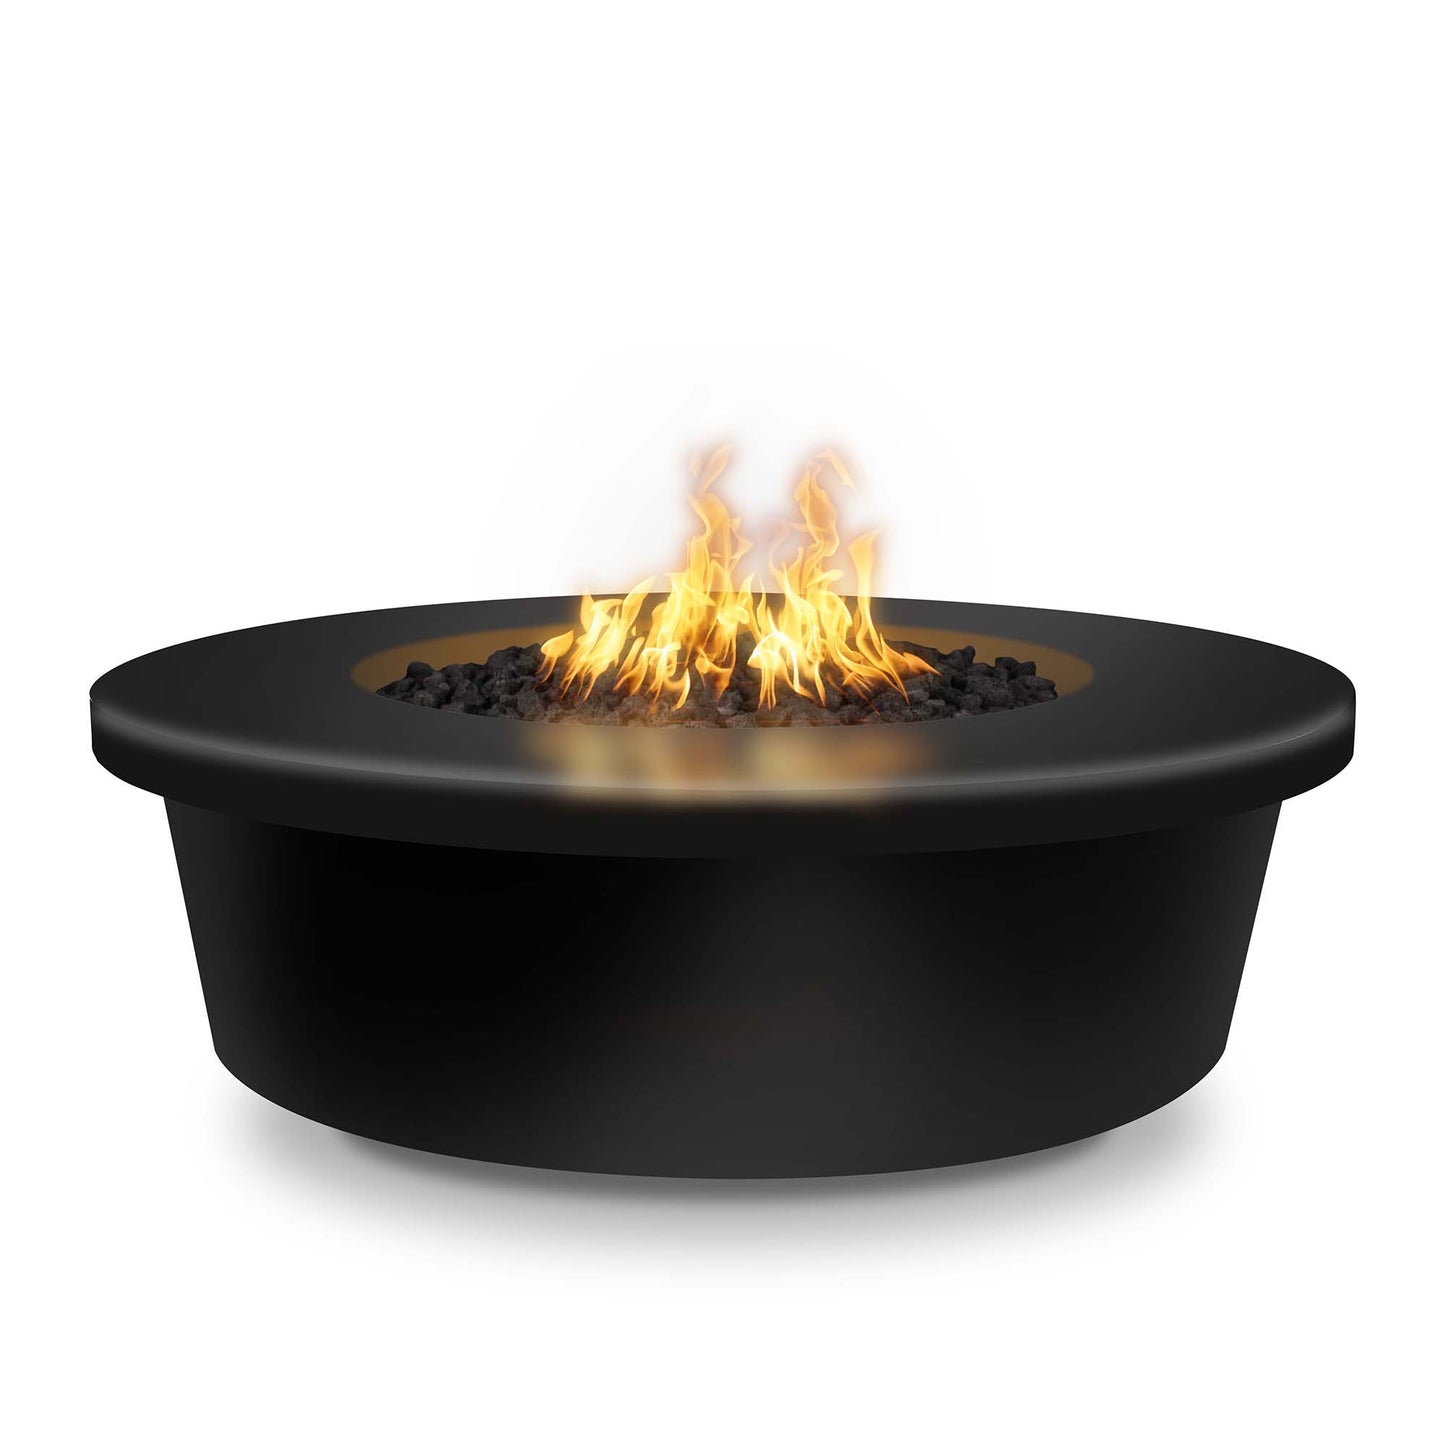 The Outdoor Plus Round Tempe 48" Hammered Copper Liquid Propane Fire Pit with Match Lit with Flame Sense Ignition